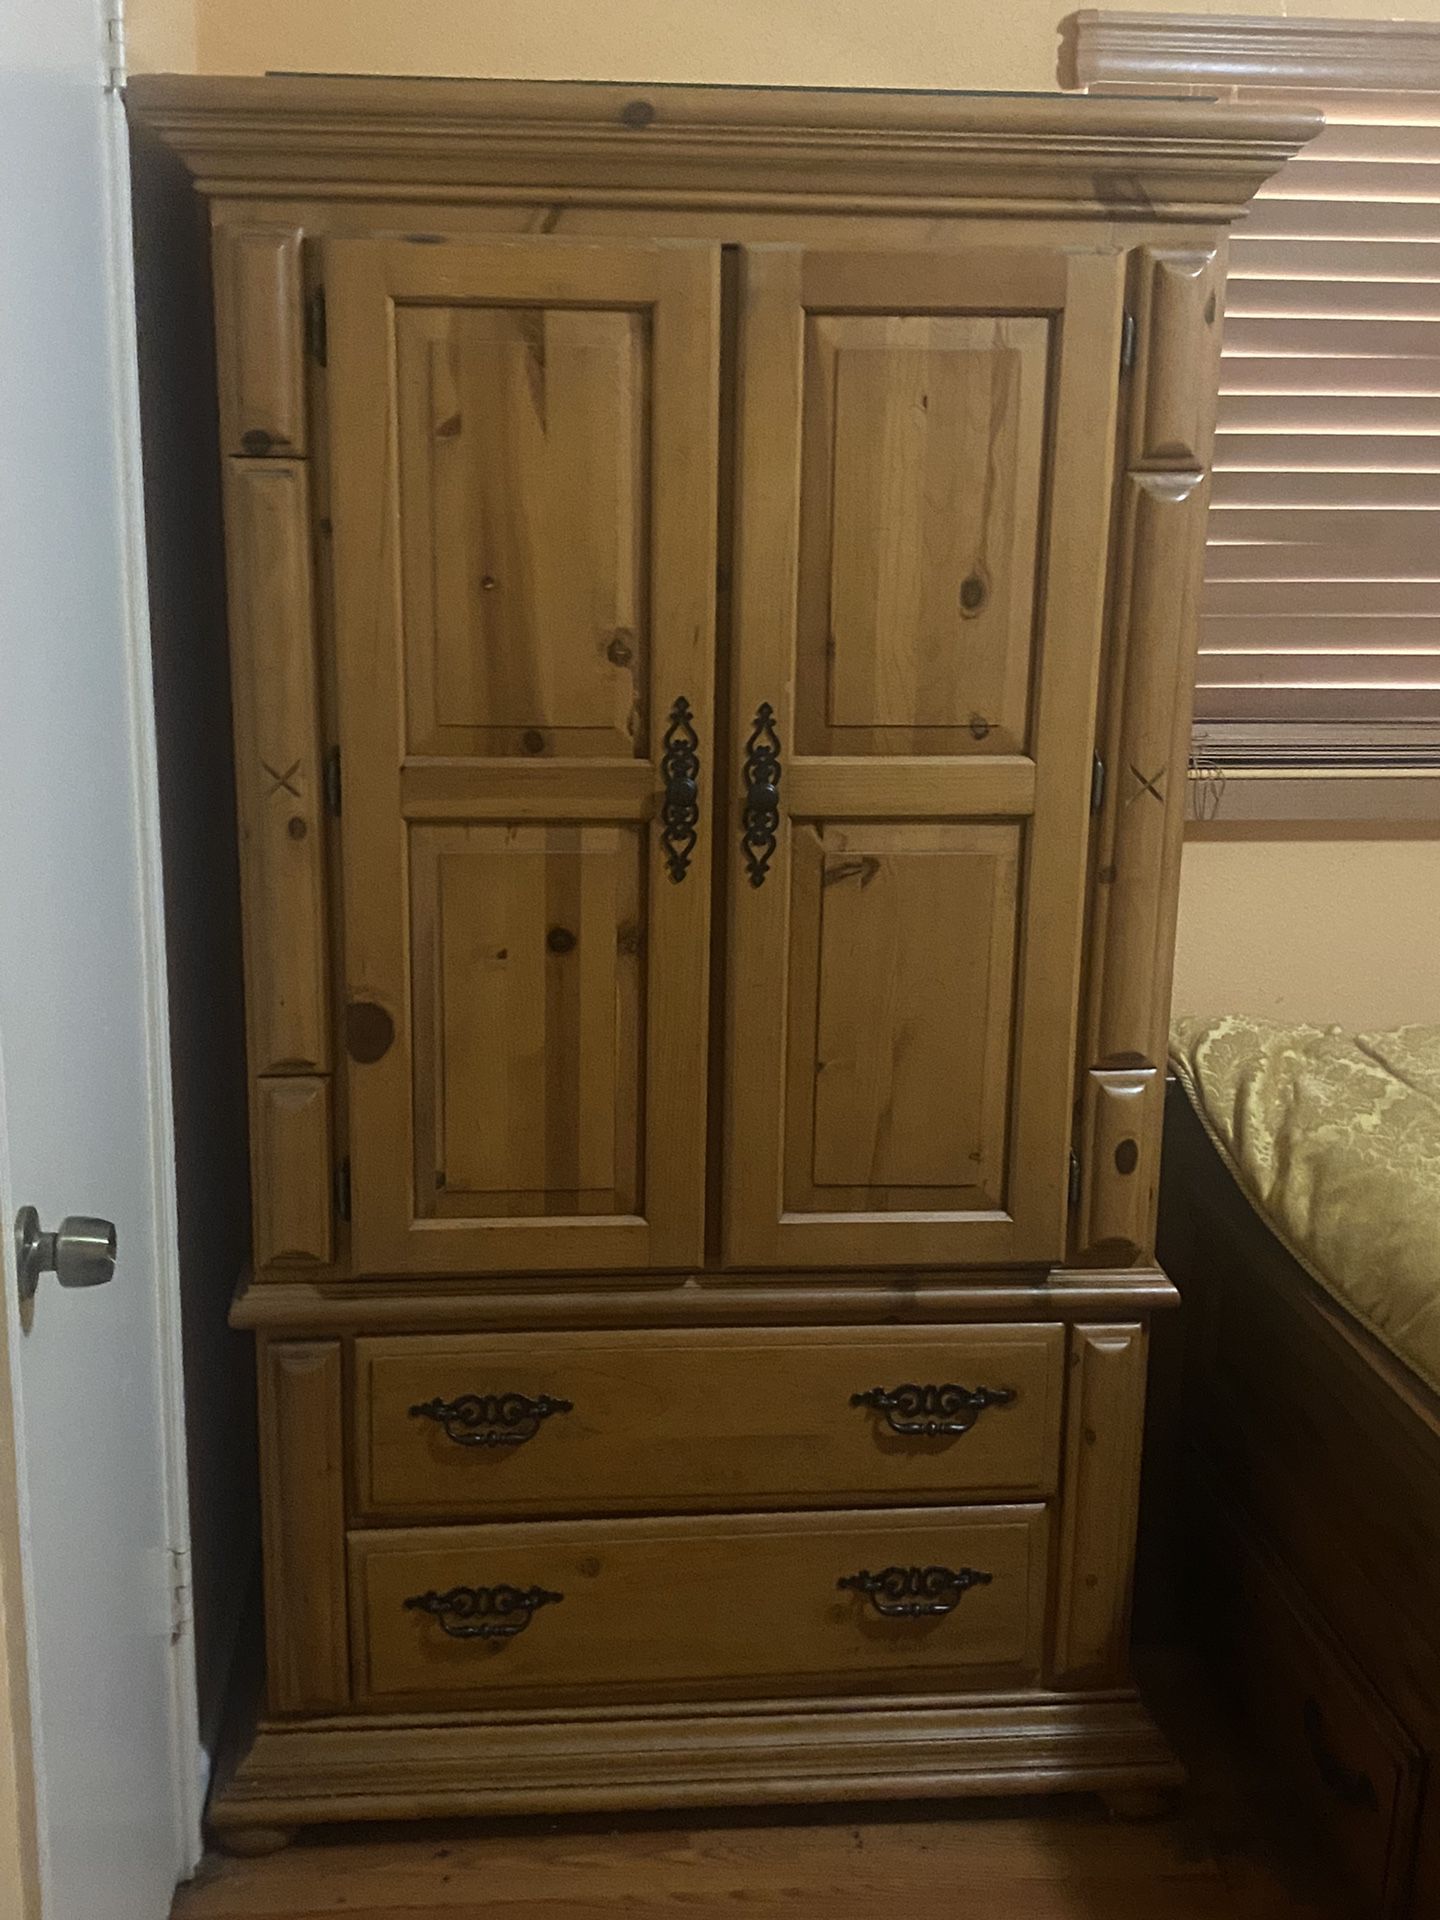 Wooden Armoire - Like New!